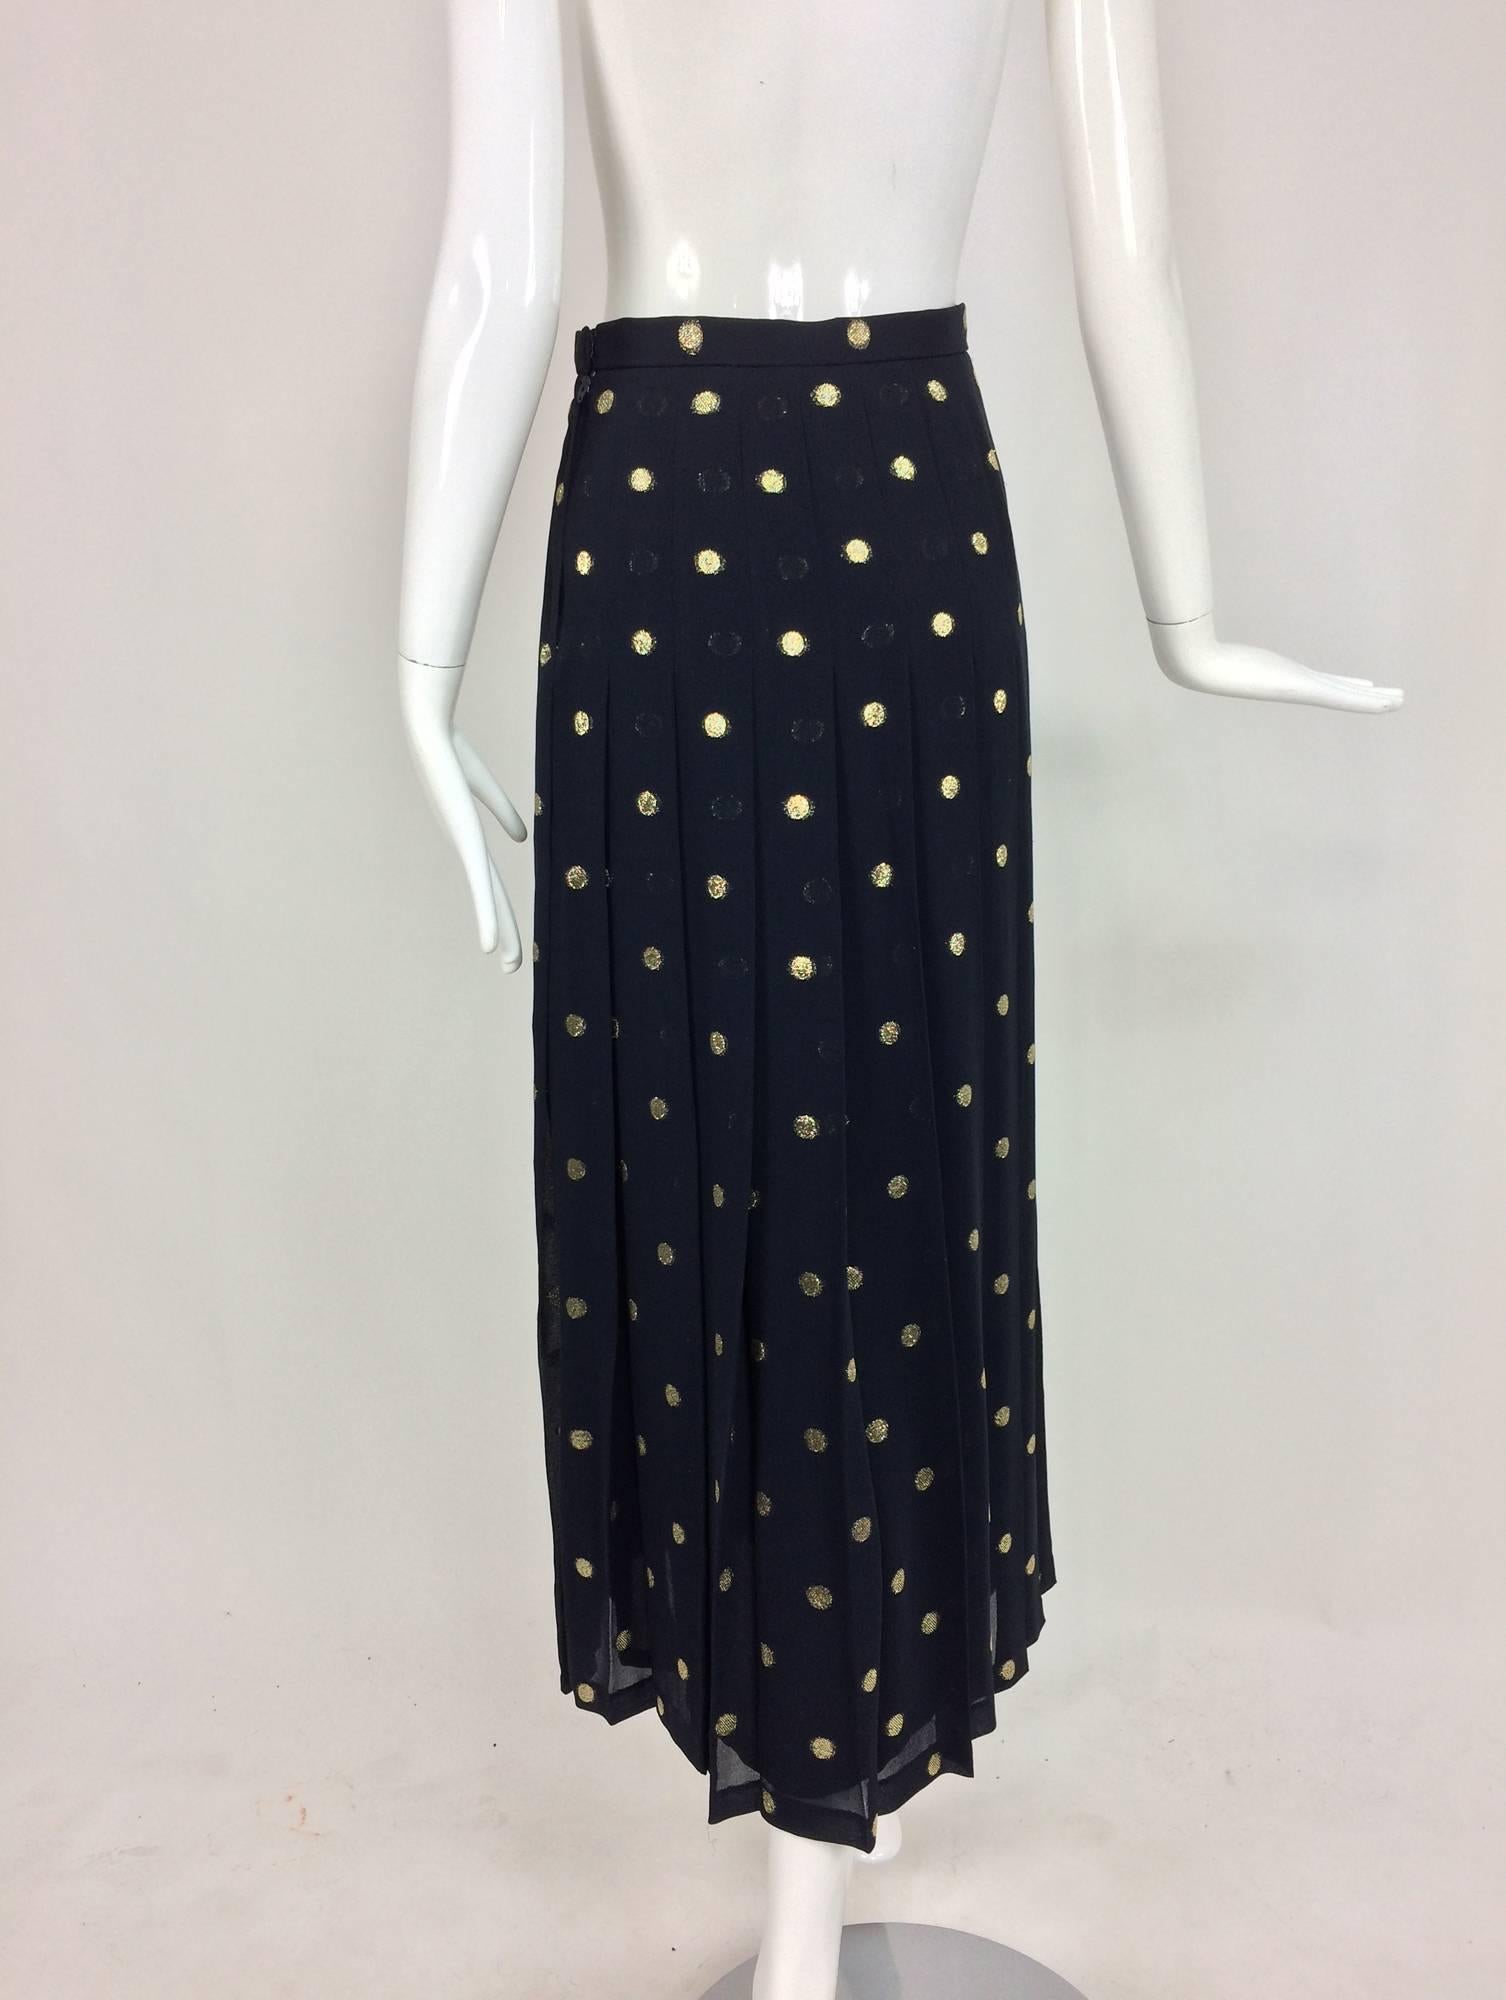 Gloria Sachs black silk chiffon metallic gold coin dot pleated skirt 1990s In Excellent Condition For Sale In West Palm Beach, FL